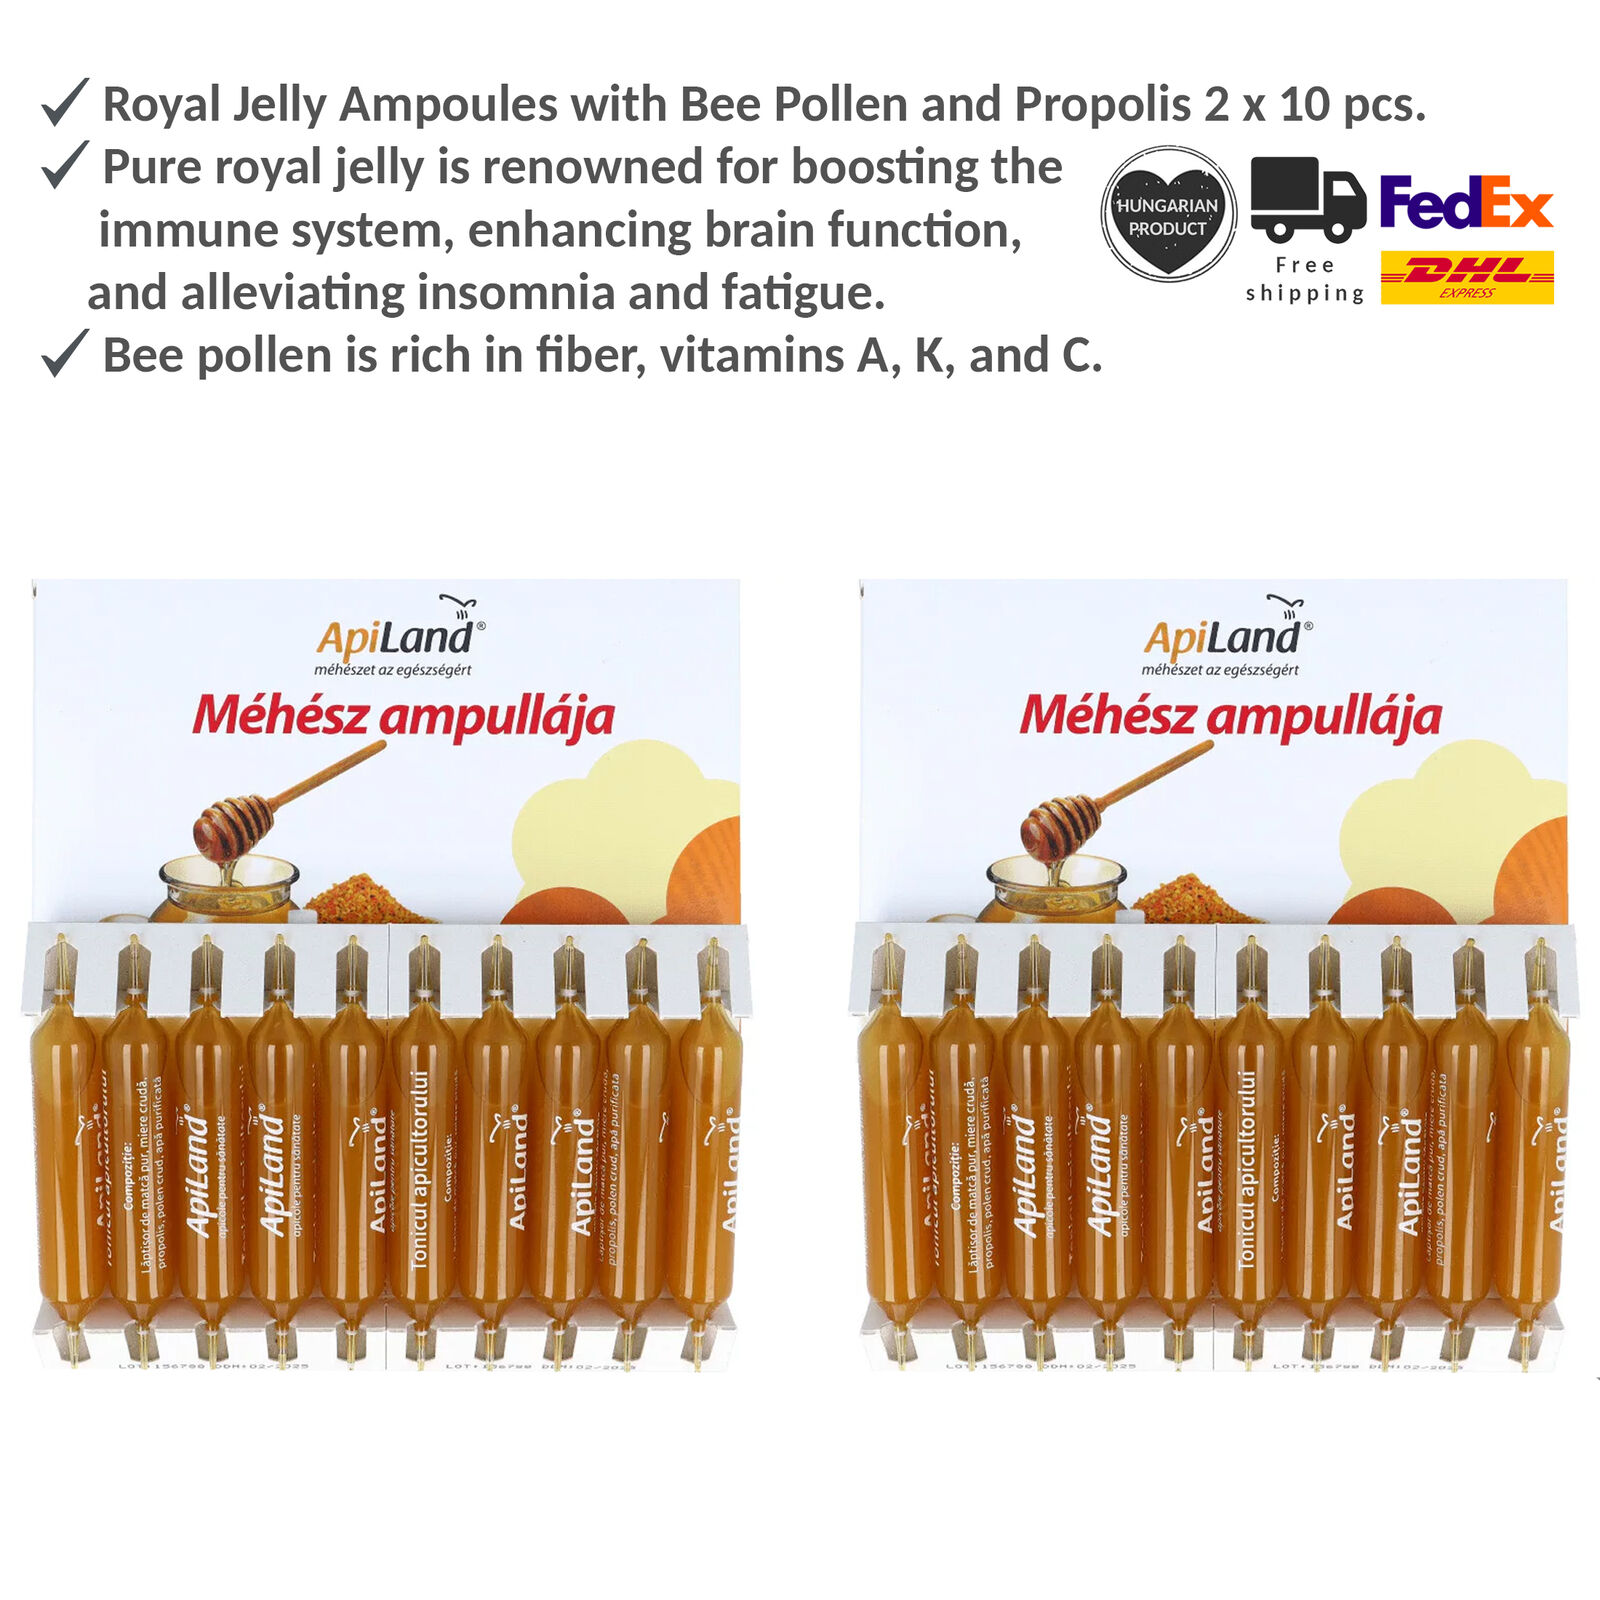 Set of Royal Jelly Ampoules with Bee Pollen and Propolis, 100% Organic, 20x10ml - Picture 1 of 3